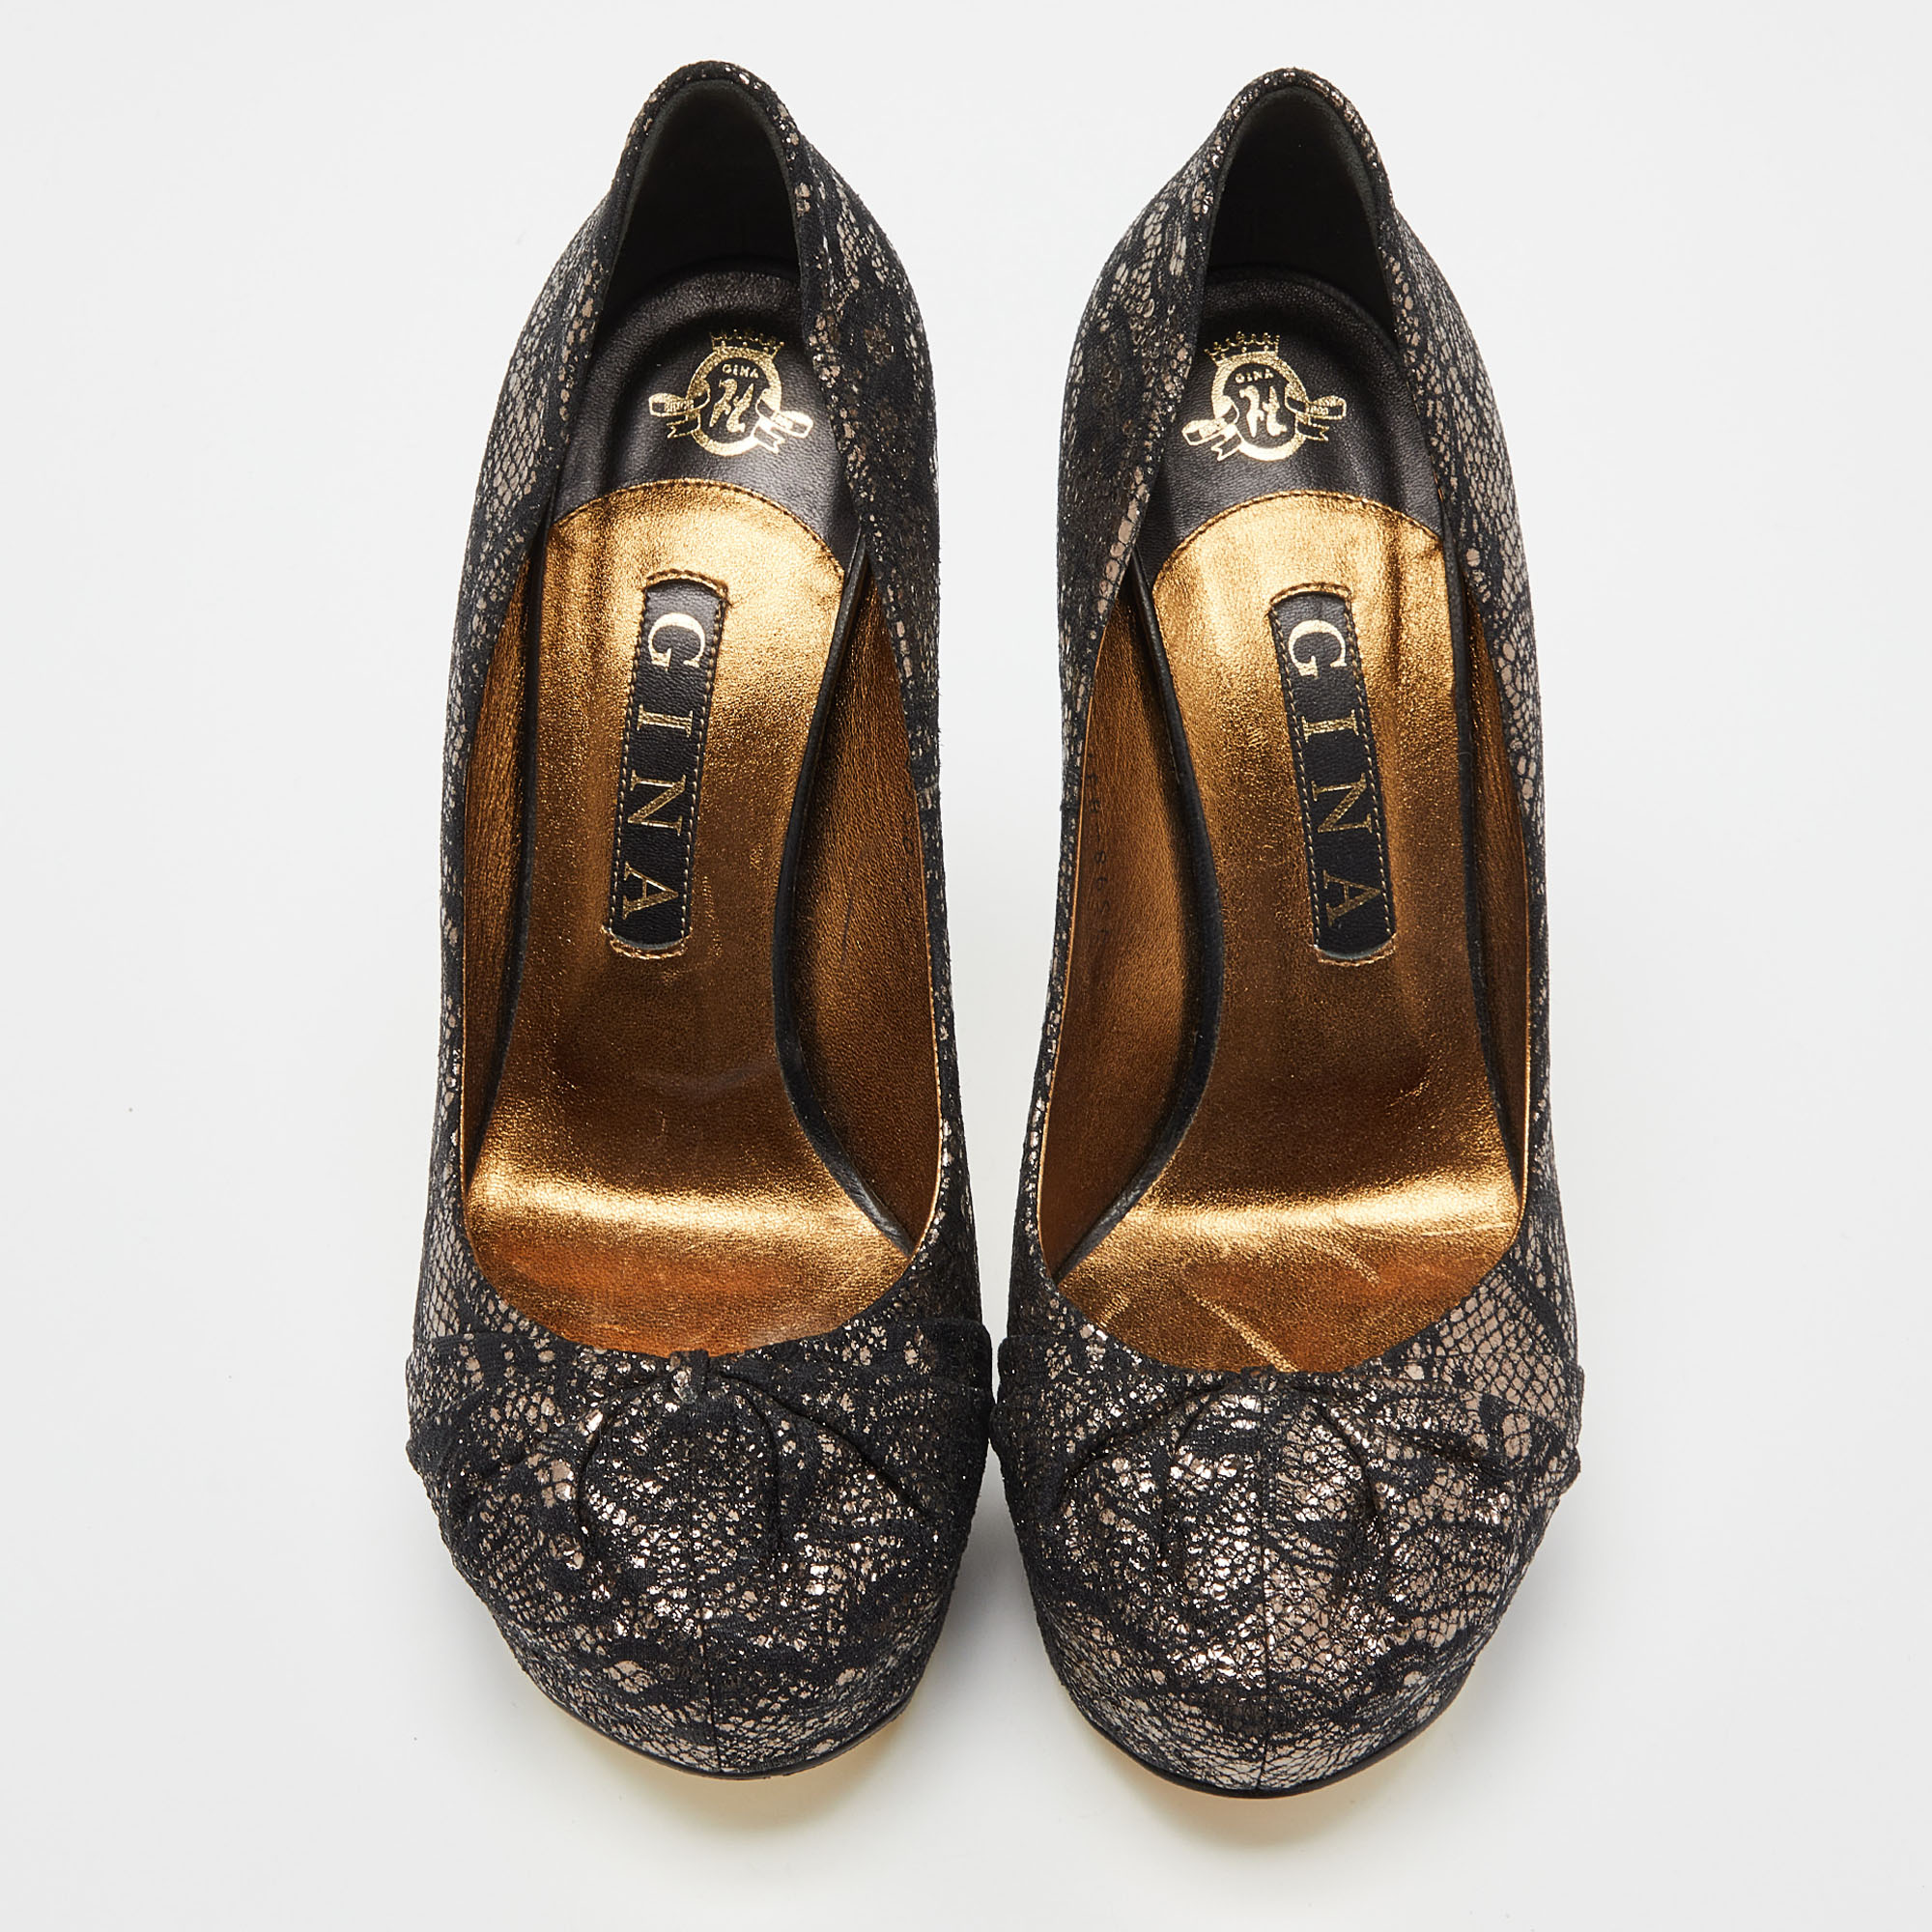 Gina Black/Gold Lace And Leather Platform Pumps Size 39.5